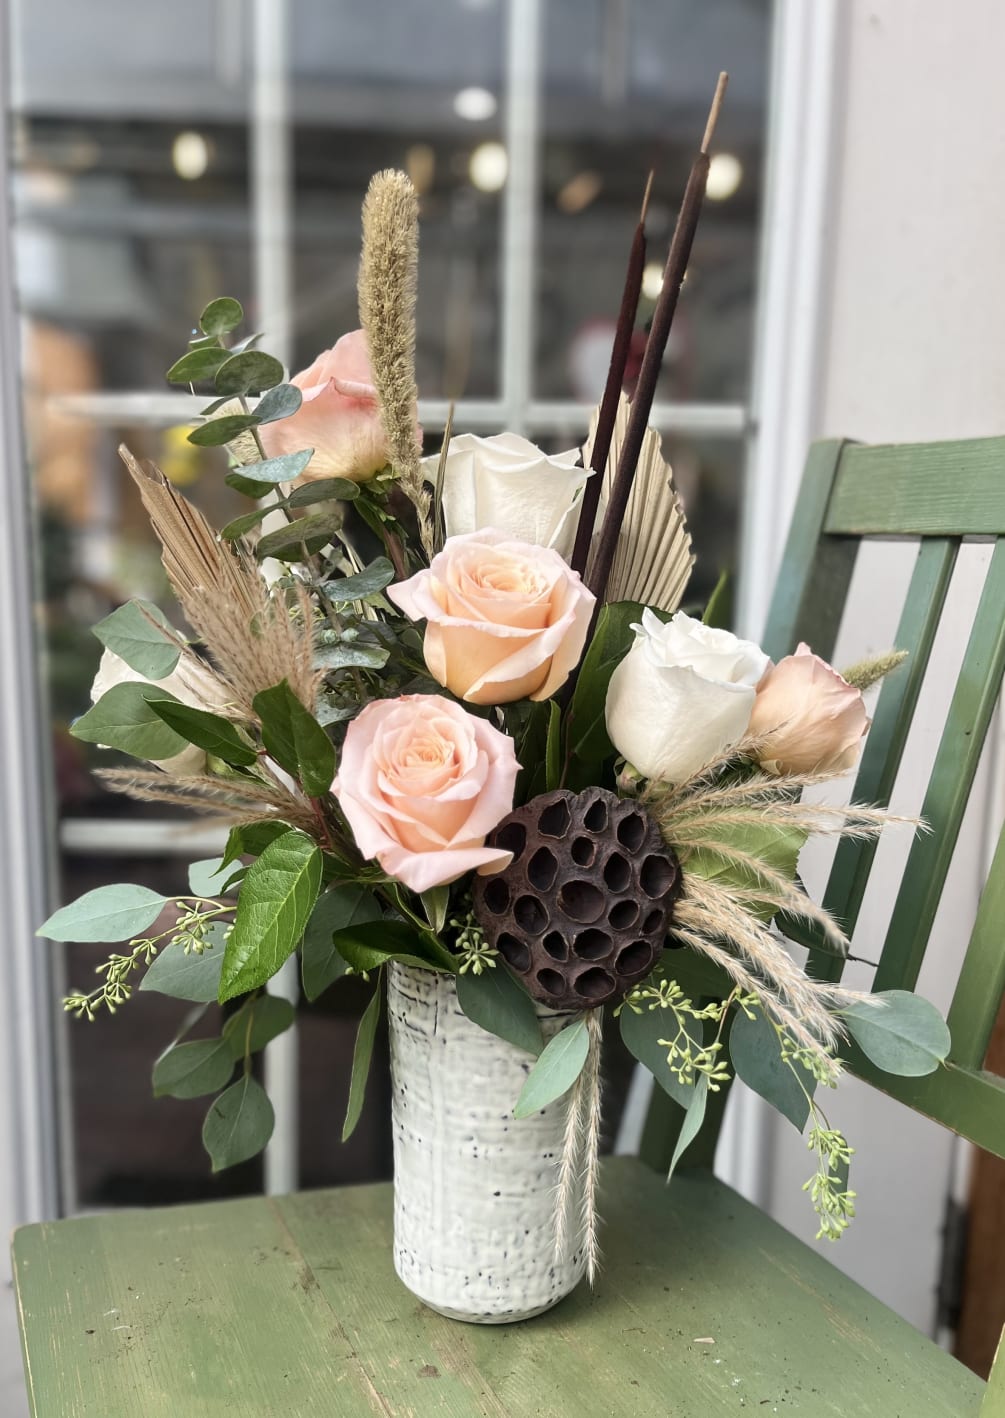 Bellissima includes peach and white roses, lotus pods, cattails, and dried wheats